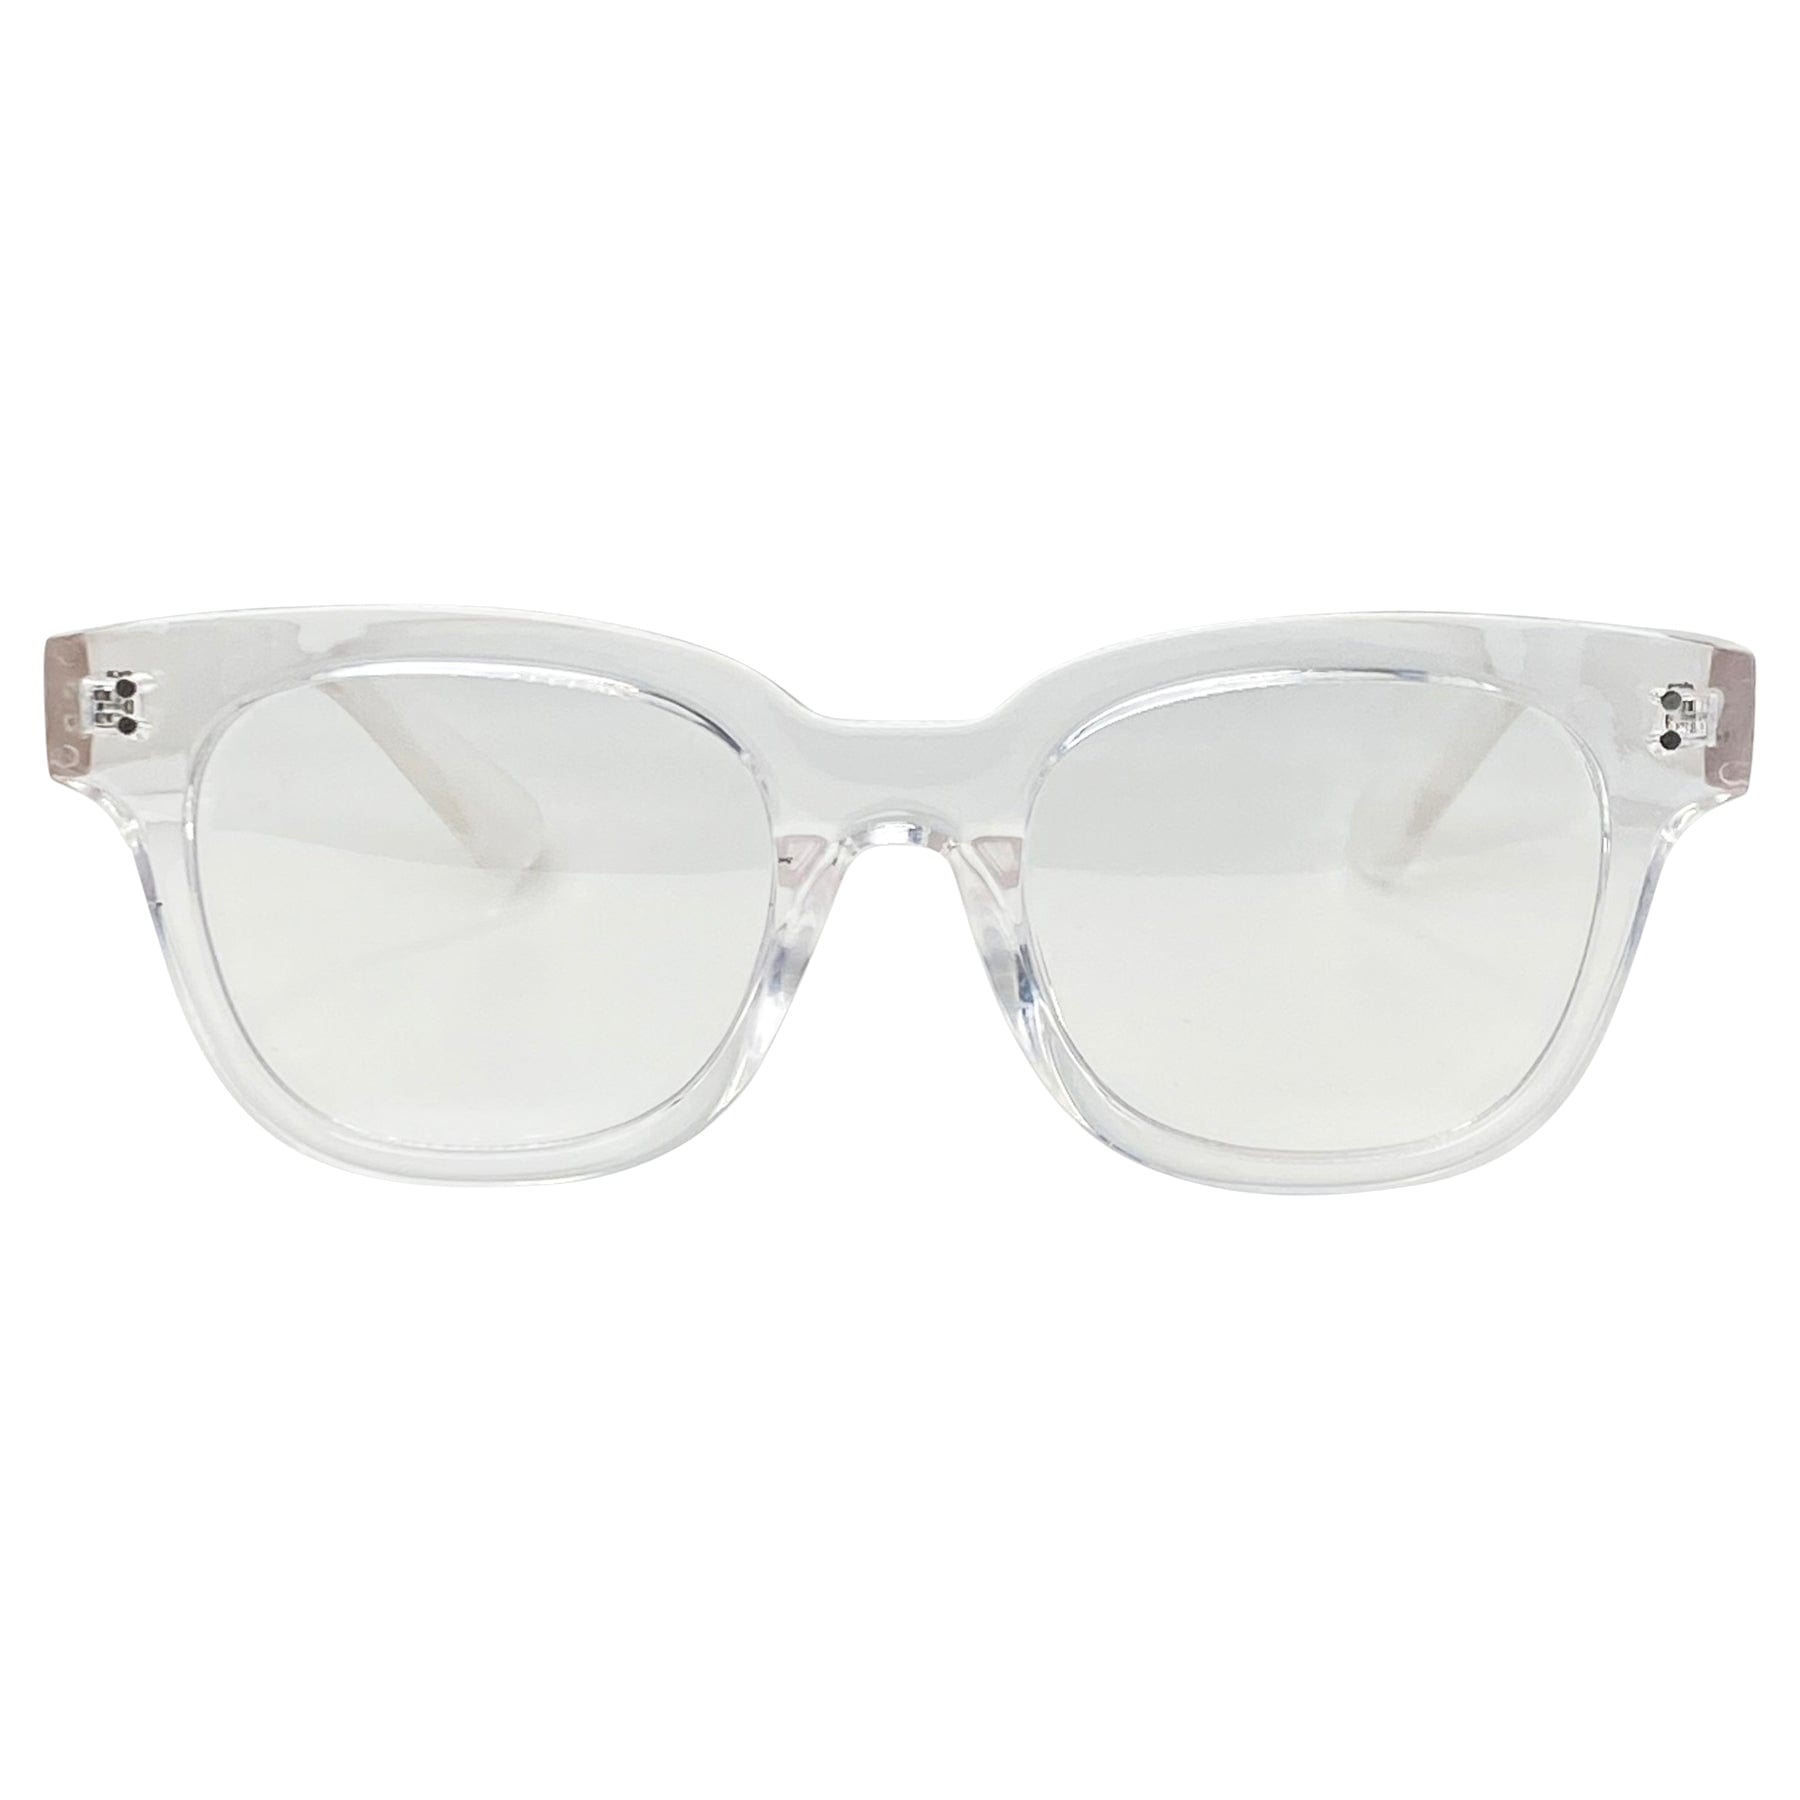 crystal clear glasses women and men with a blueblocker lens 